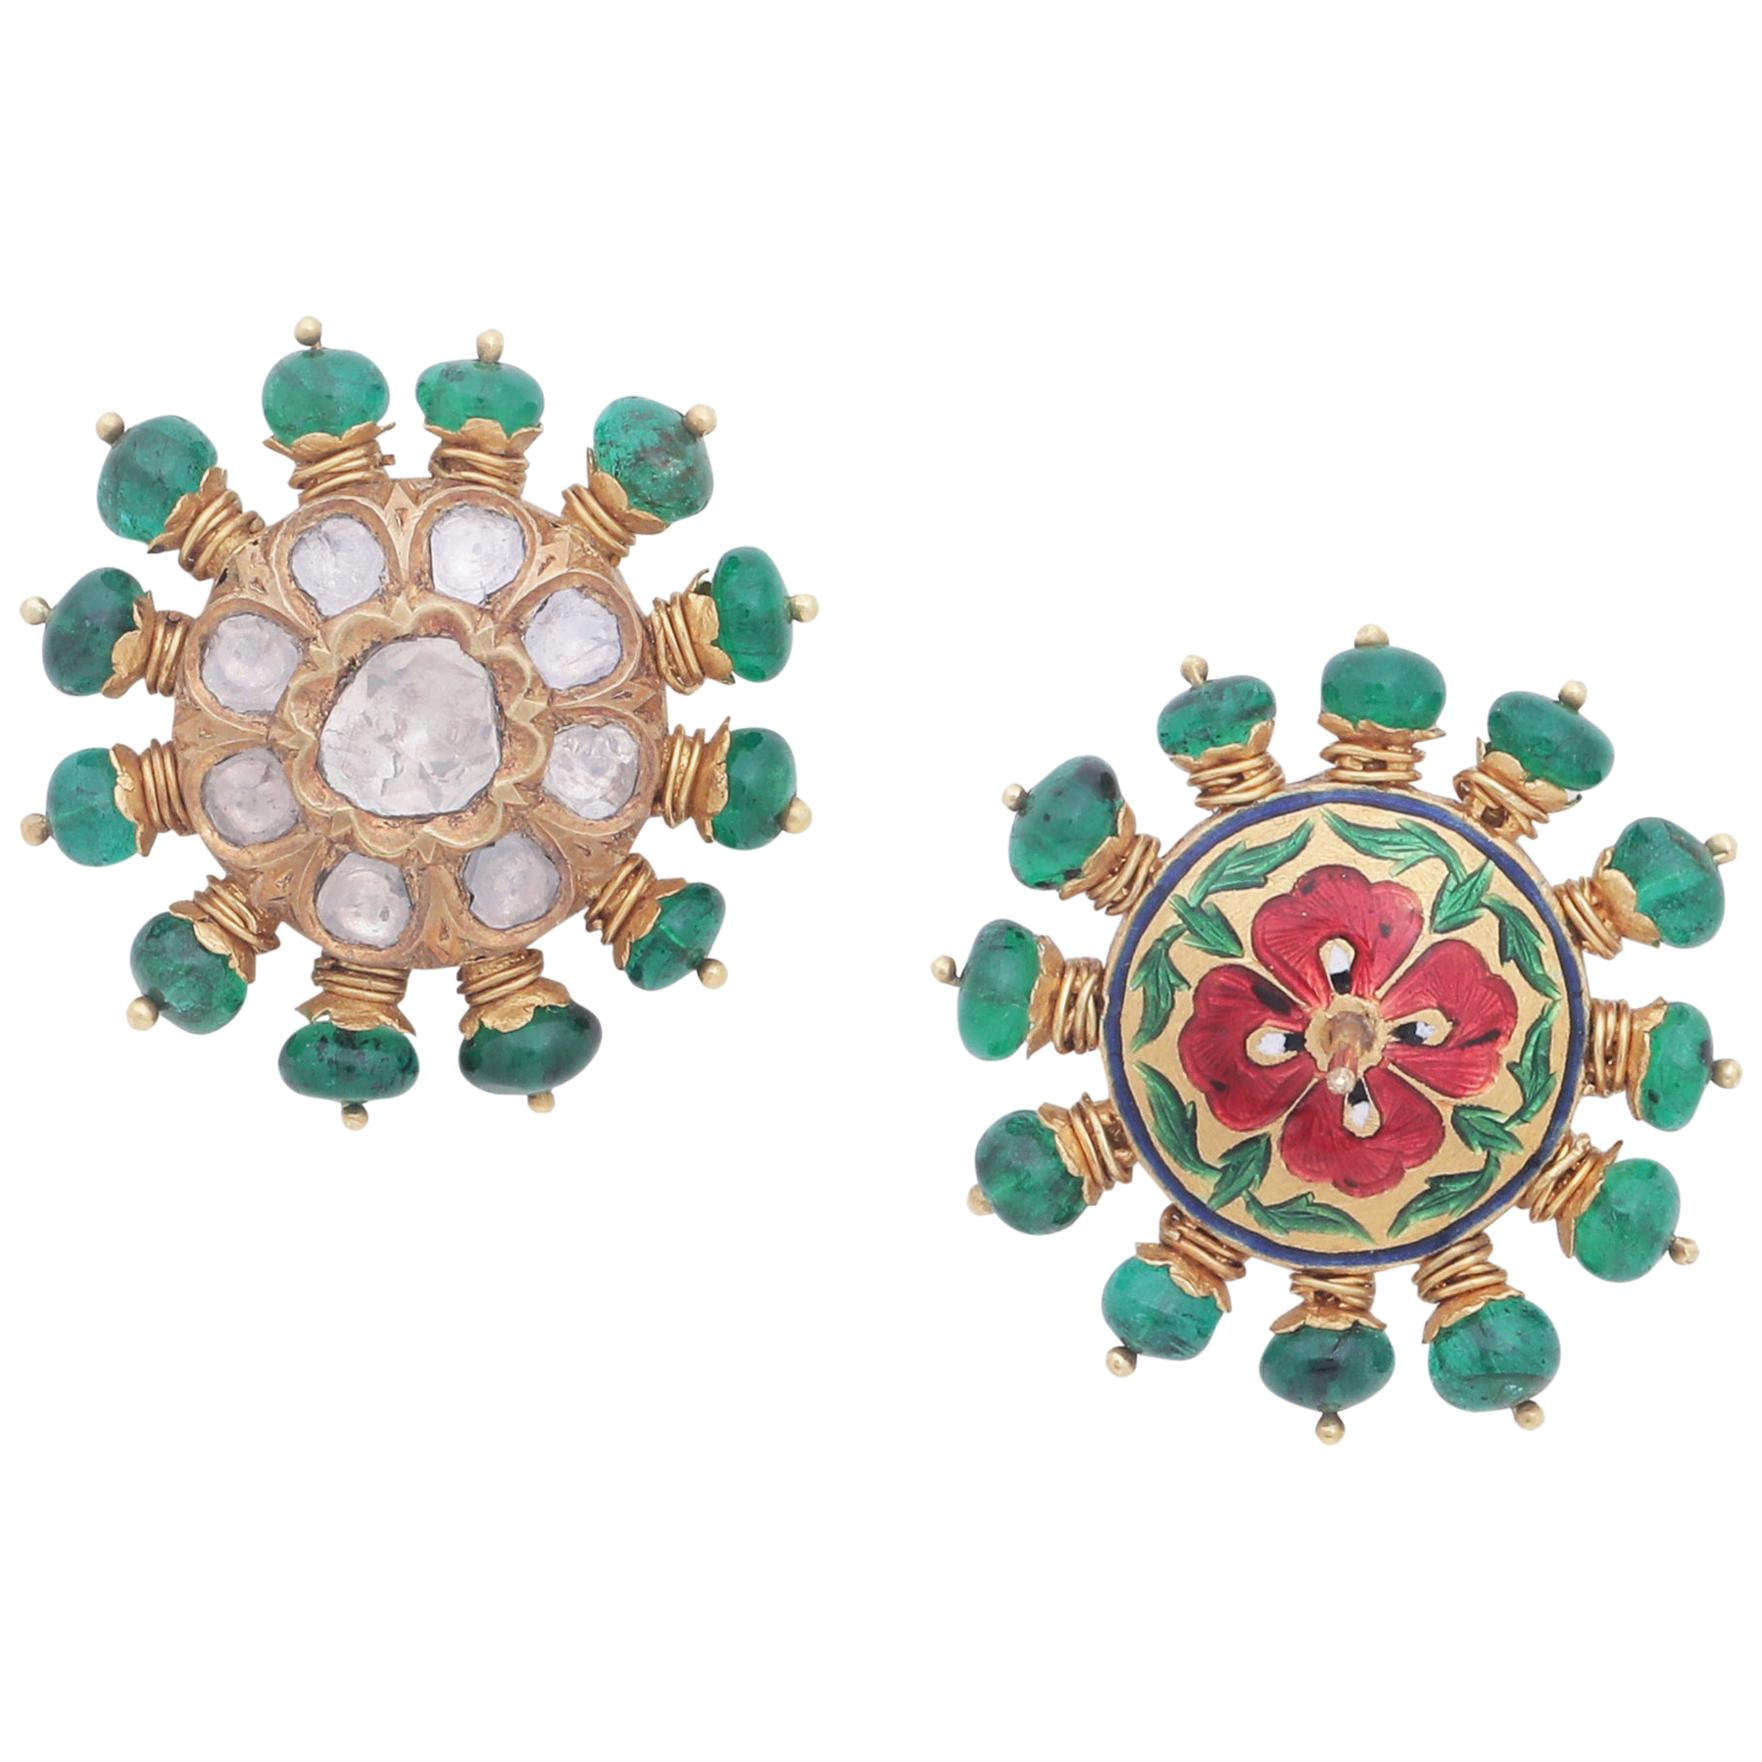 Earring Studs Pair with Diamonds and Zambian Emerald Beads in 18k Gold & Enamel